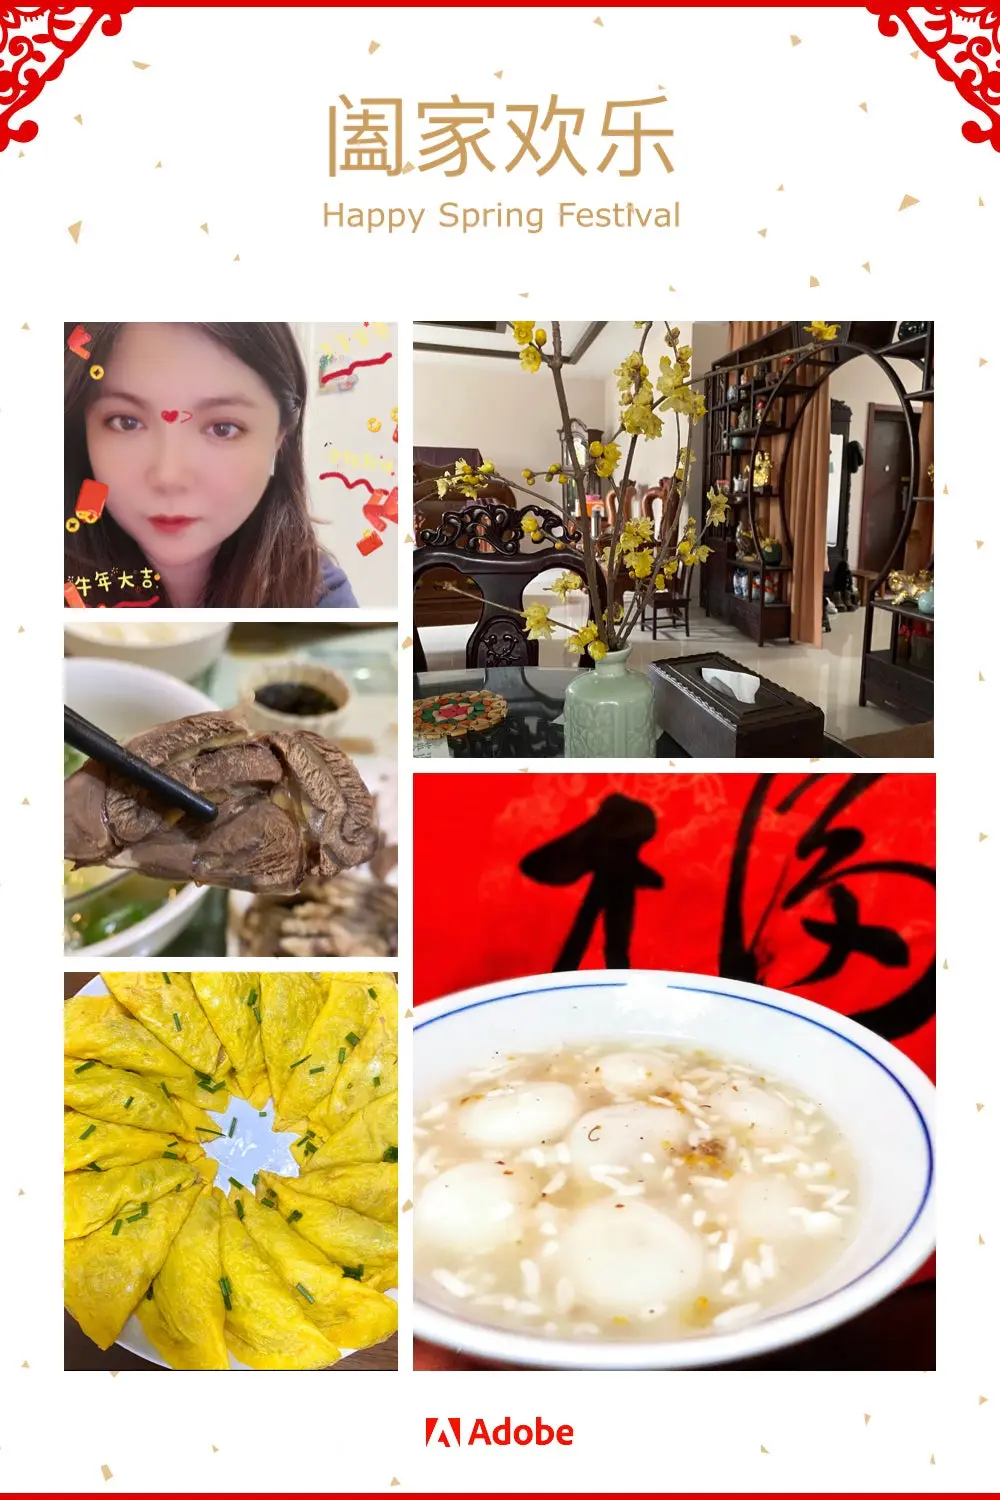 Dan Jiao’ — egg wrap with seasoned pork, which symbolizes "treasures of gold," and ‘Jiu Niang Tang’ — sweet wine-rice soup with small rice balls symbolizing "family reunion and perfection." 